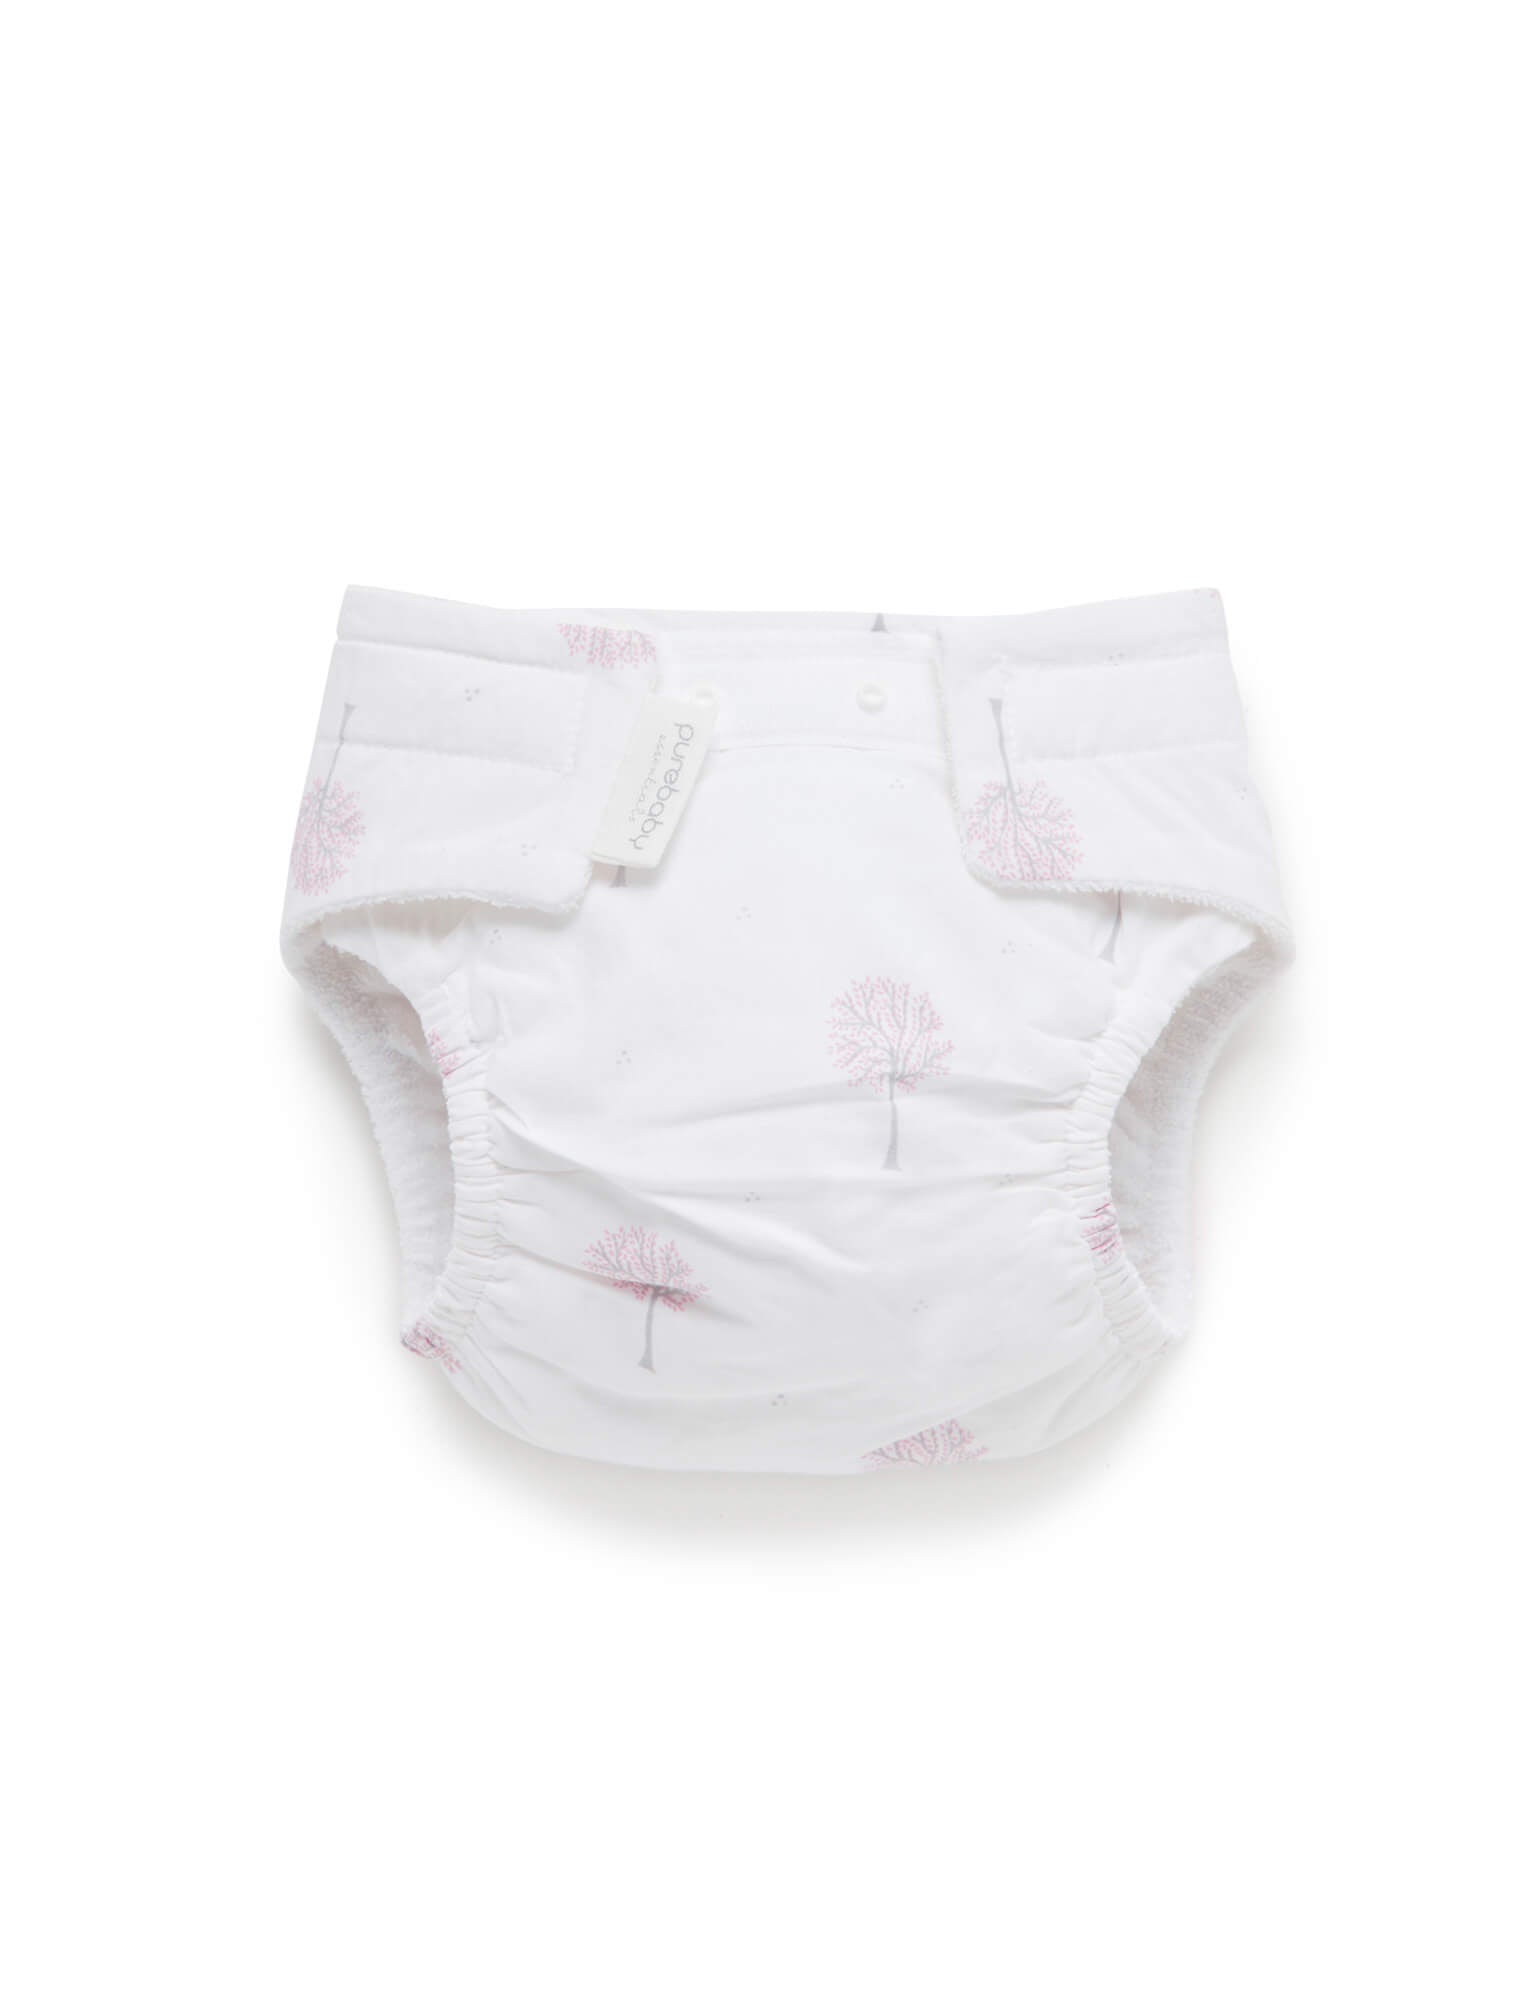 Reusable Nappy Pant in Pale Pink Tree